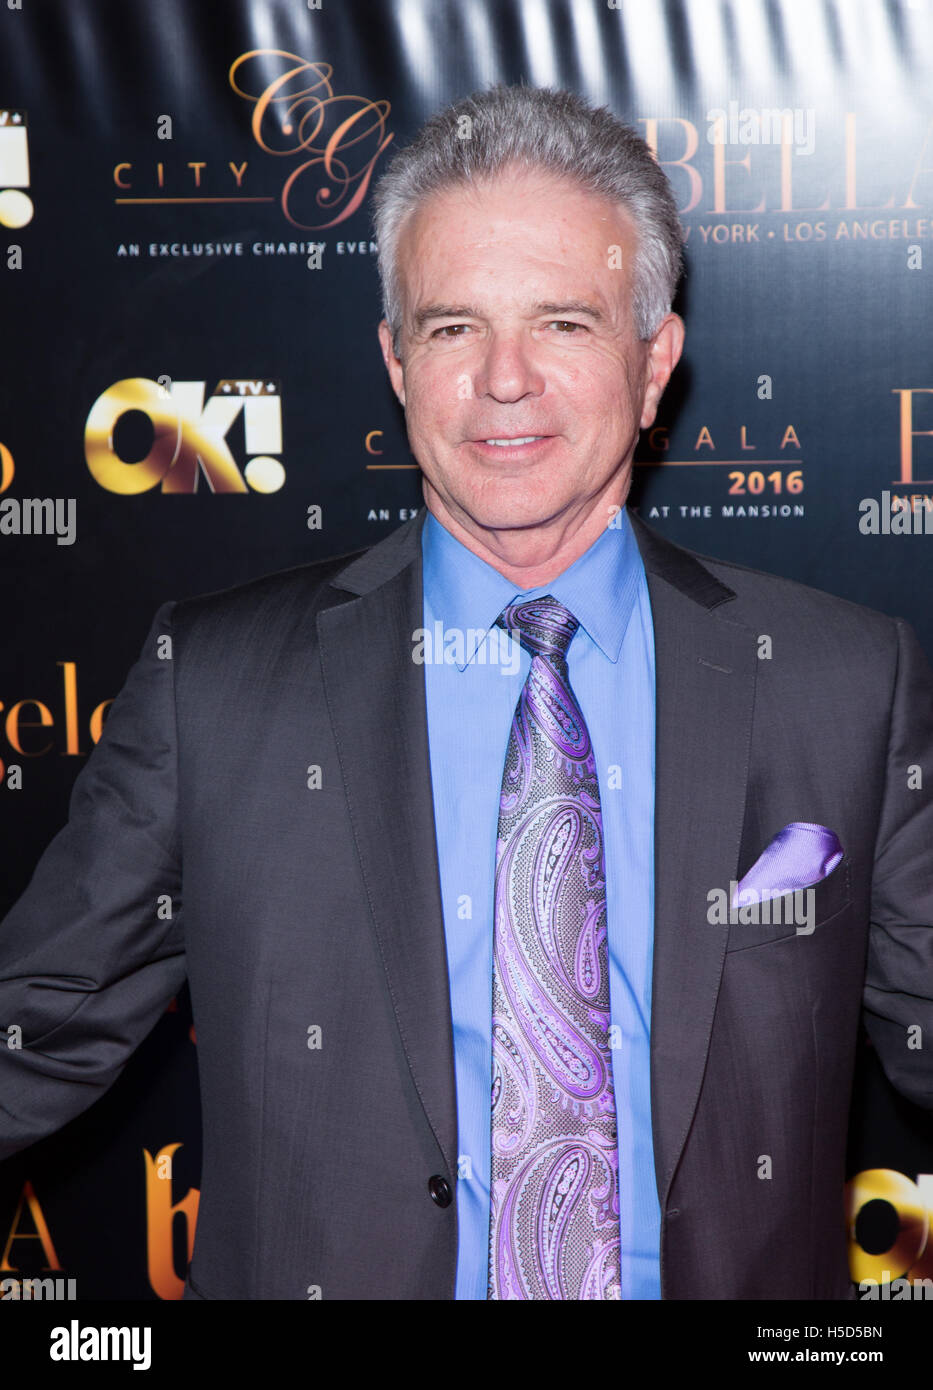 Tony Denison attends the 2016 City Gala Fundraiser at The Playboy Mansion  on February 15, 2016 in Los Angeles, California Stock Photo - Alamy